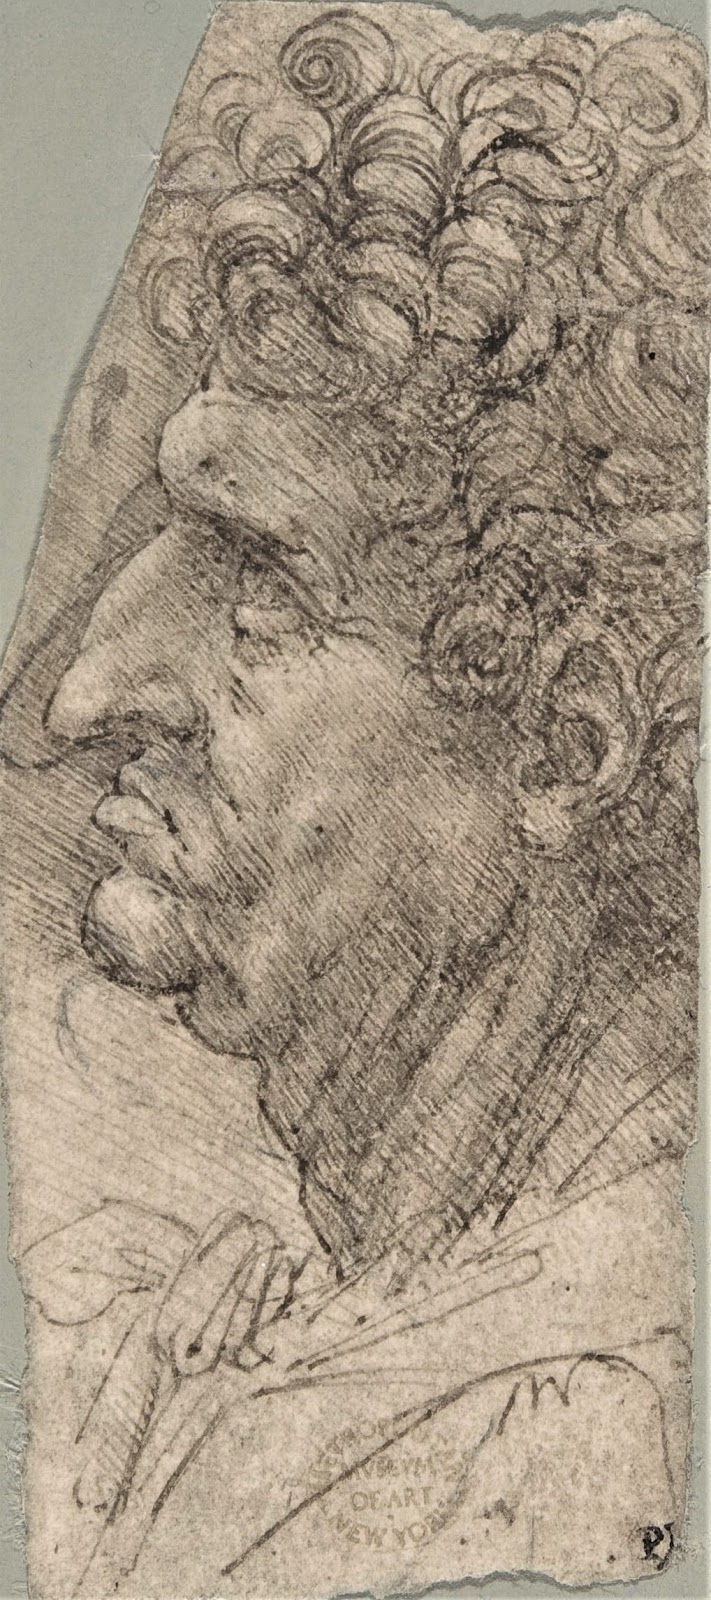 Collections of Drawings antique (11793).jpg